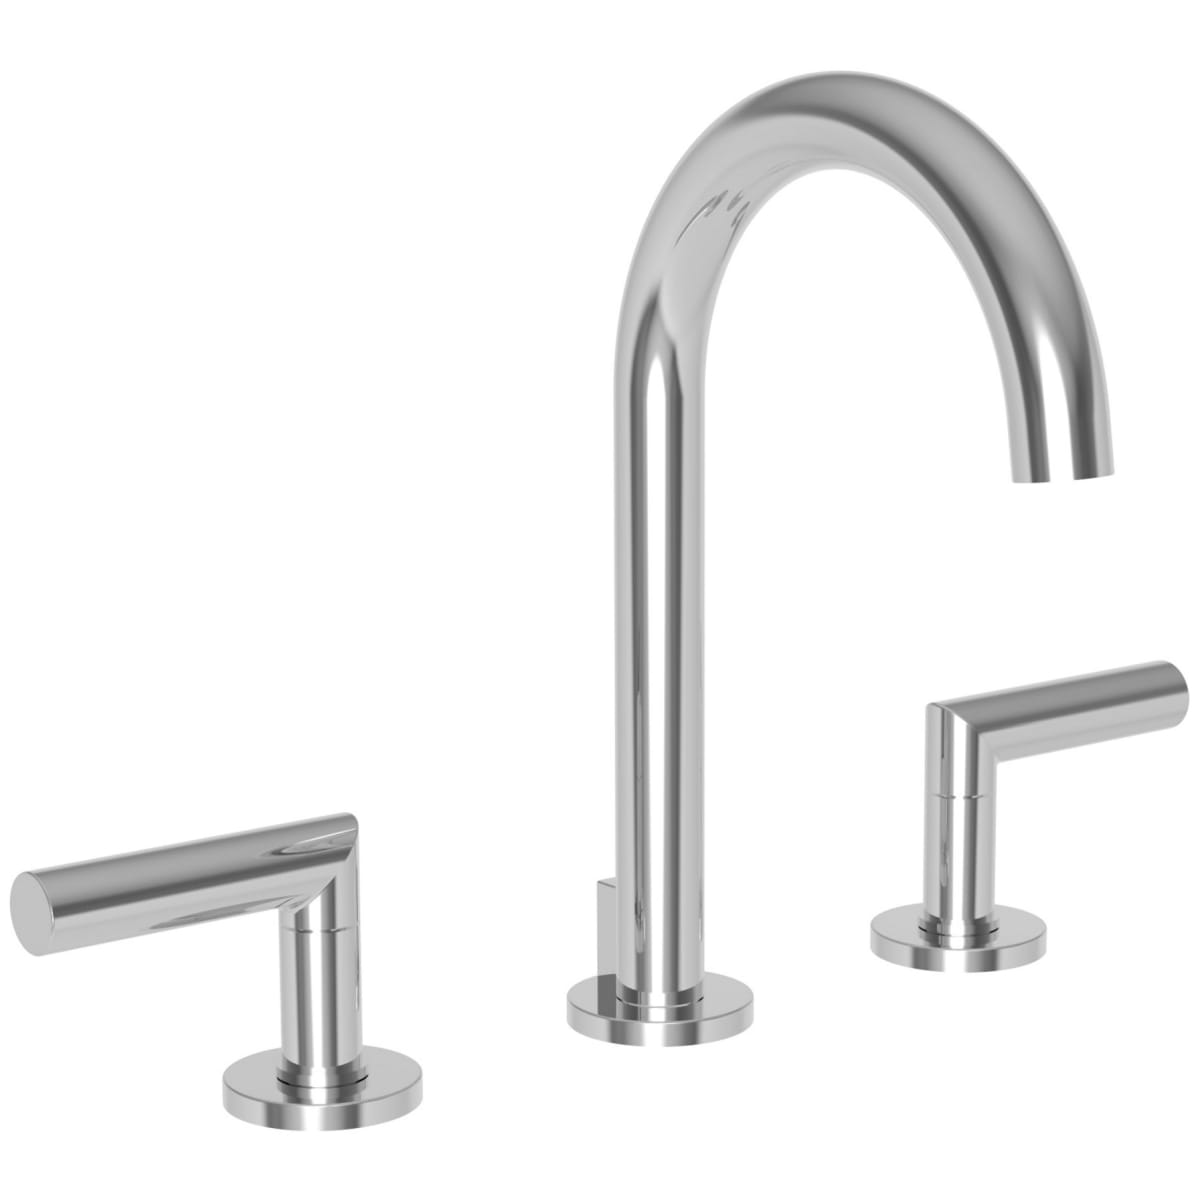 Newport Brass Pavani Polished Chrome 2-handle Widespread WaterSense  Bathroom Sink Faucet with Drain Lowes.com